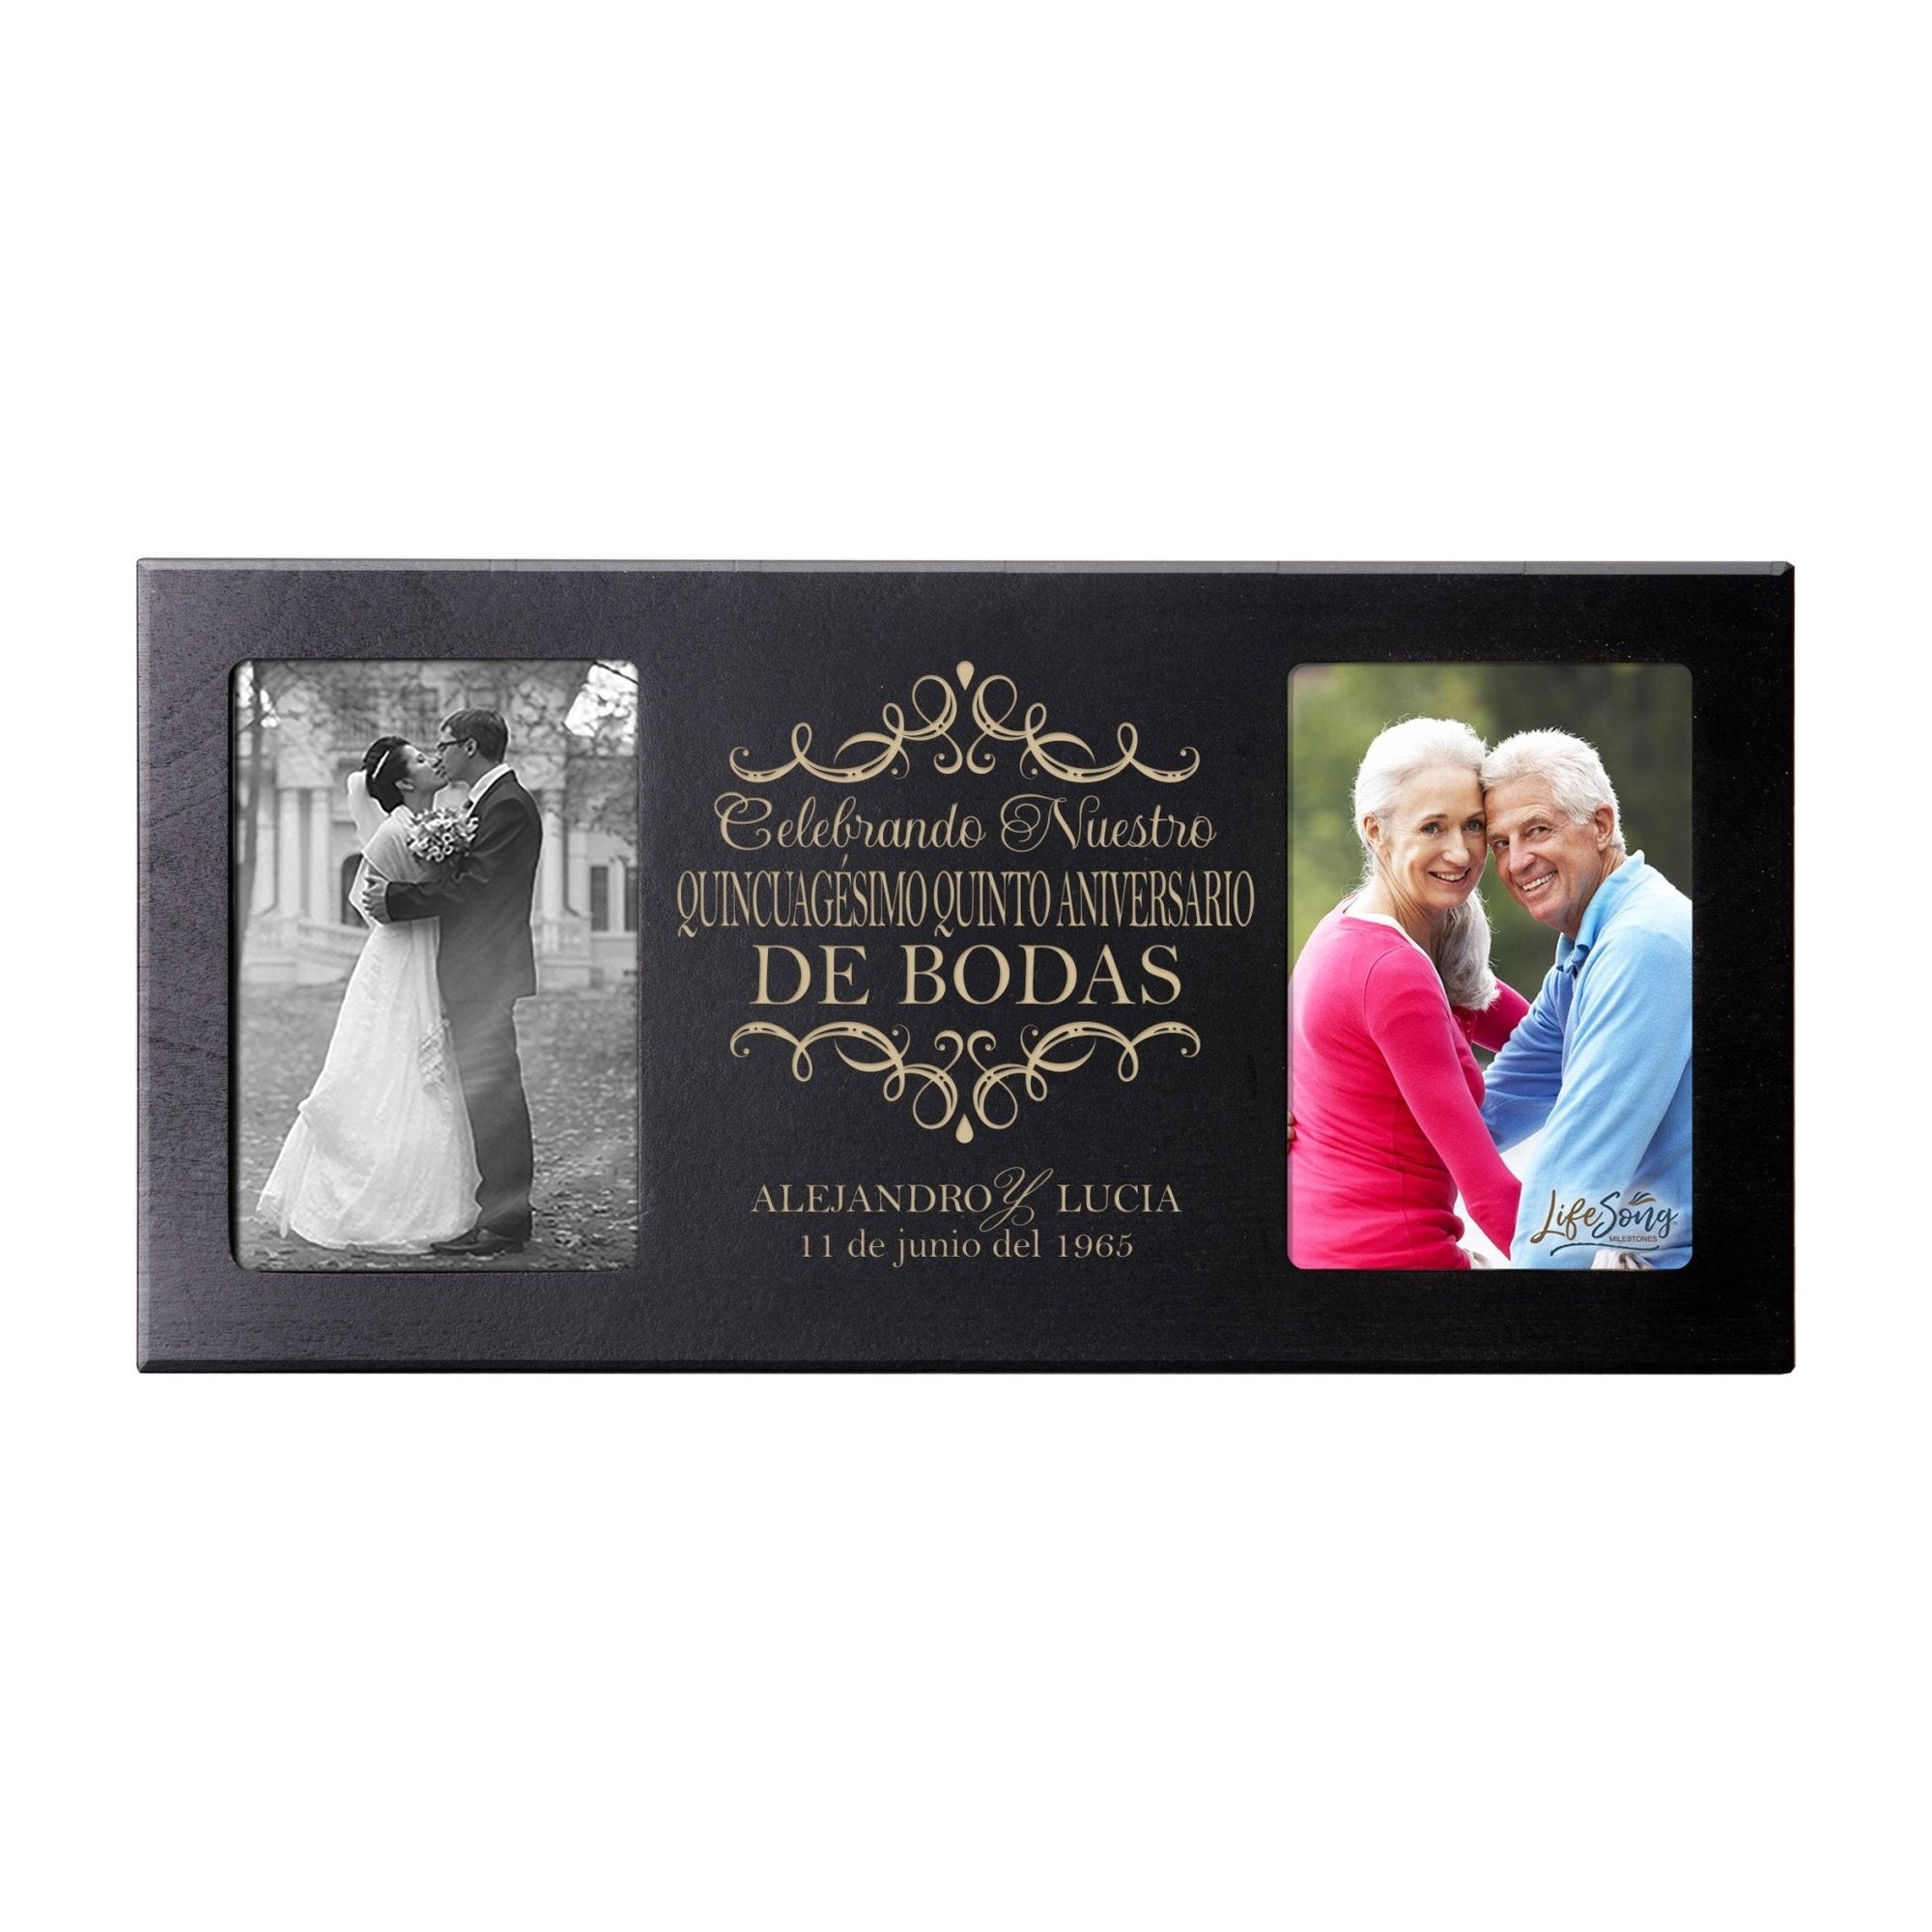 Lifesong Milestones Personalized 55th Wedding Anniversary Spanish Picture Frame Decorations